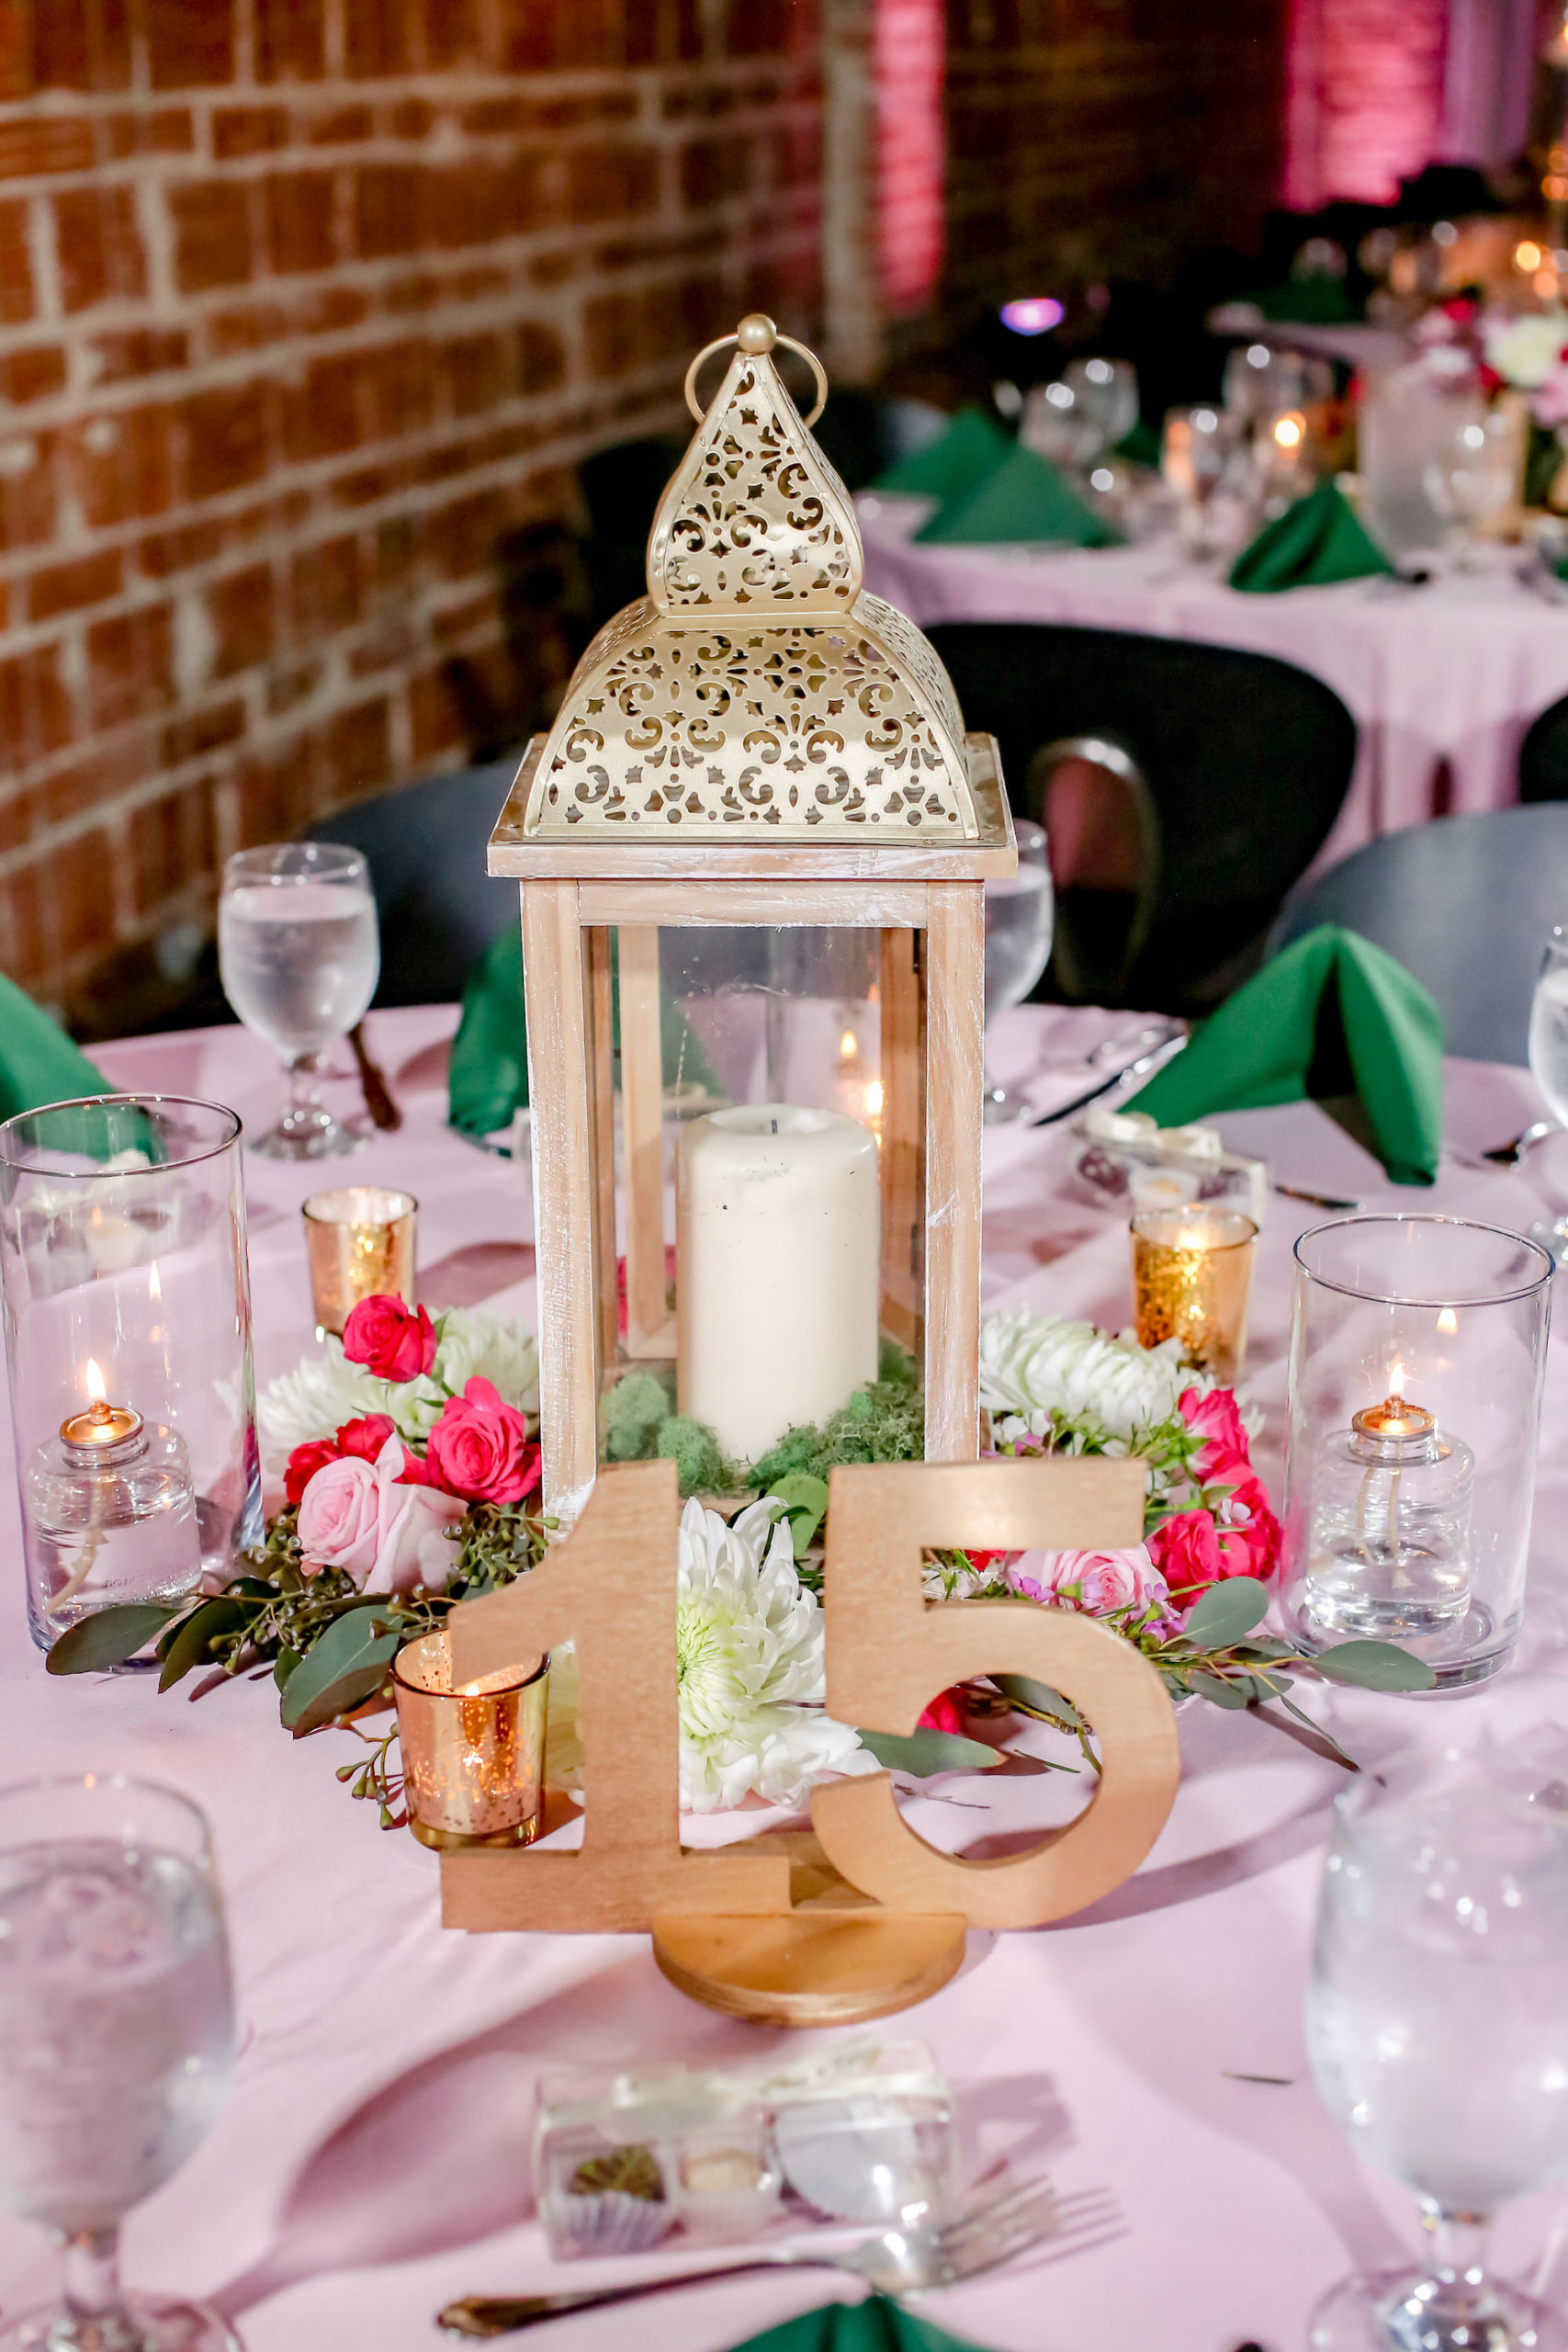 Vintage Inspired Wedding Decor at Reception, Round Tables with St. Patrick's Day Wedding Theme, Dusty Rose, Blush Pink Linens, Emerald Green Napkins, Ivory and and Red Florals with Candles, Wooden Table Numbers | Florida Wedding Photographer Lifelong Photography Studios | Tampa Bay Unique Wedding Venue NOVA 535 in Downtown St. Pete